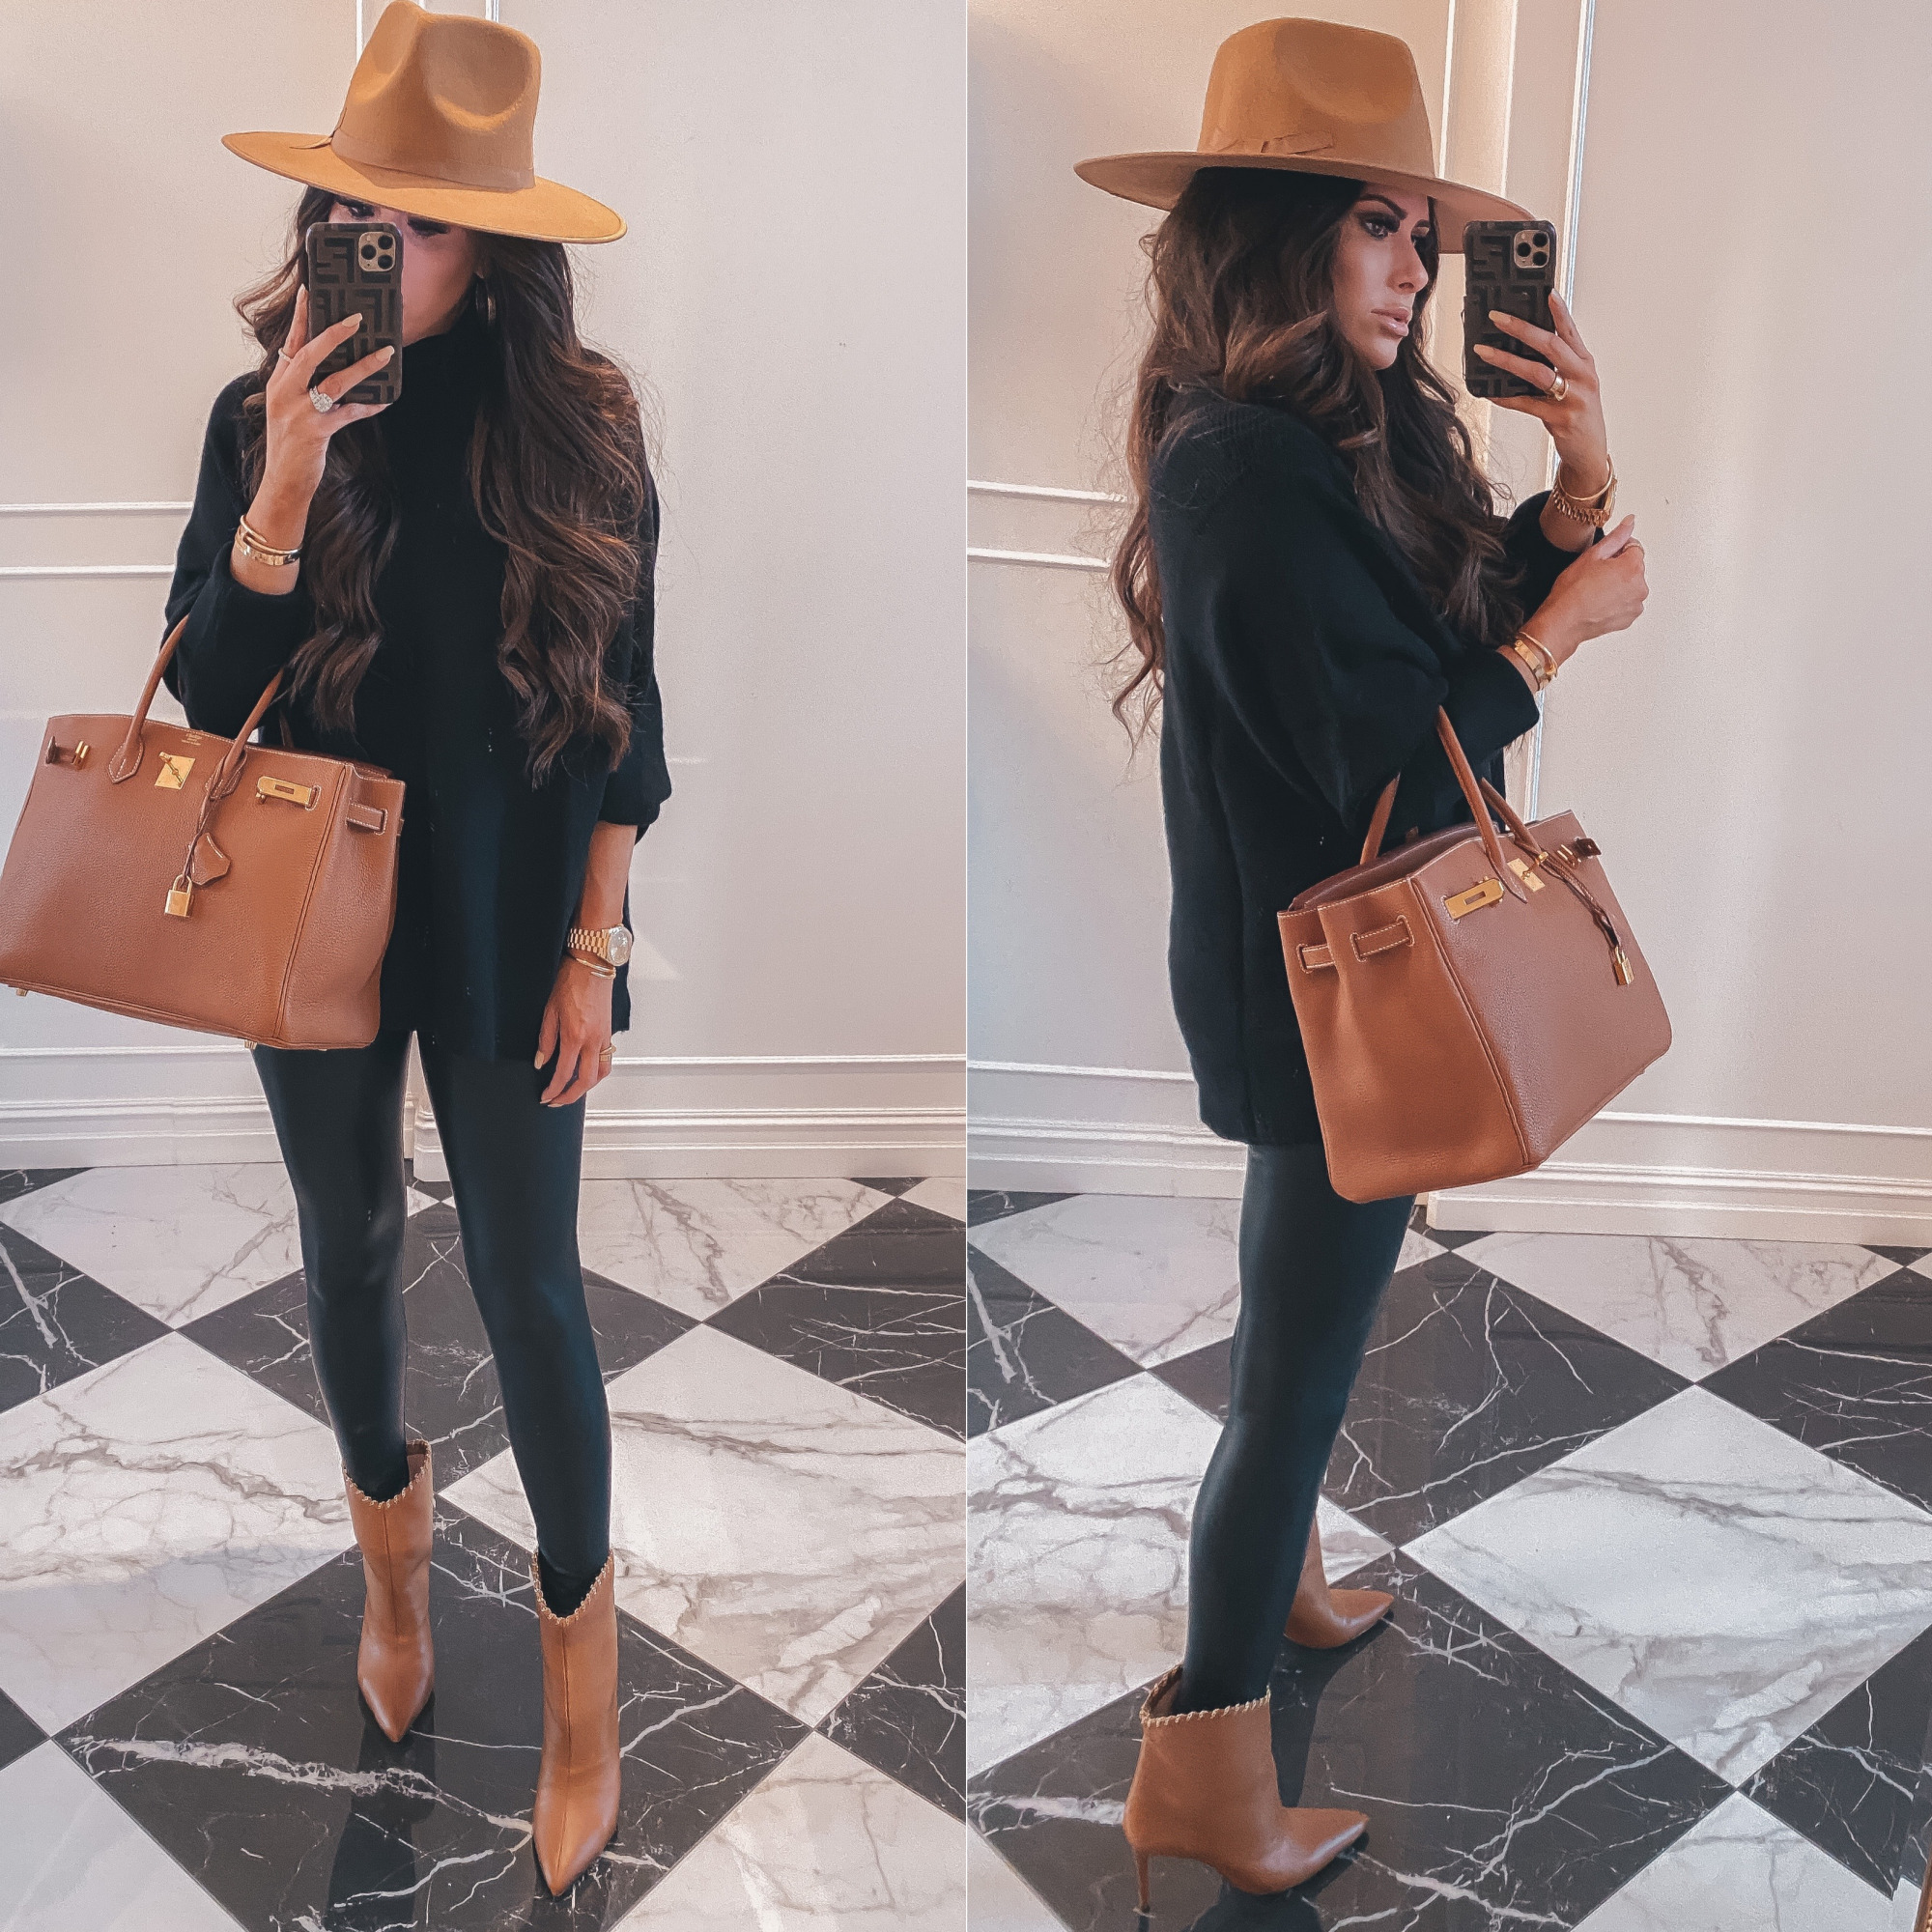 Thanksgiving Outfits by popular US fashion blog, The Sweetest Thing: image of Emily Gemma wearing a oversized black mock neck sweater, Commando black leather leggings, Schutz Boots, Cartier rings and bracelets, Bracha necklace, The Styled Collection earrings, tan felt fedora, and holding a Hermes Birkin bag. 